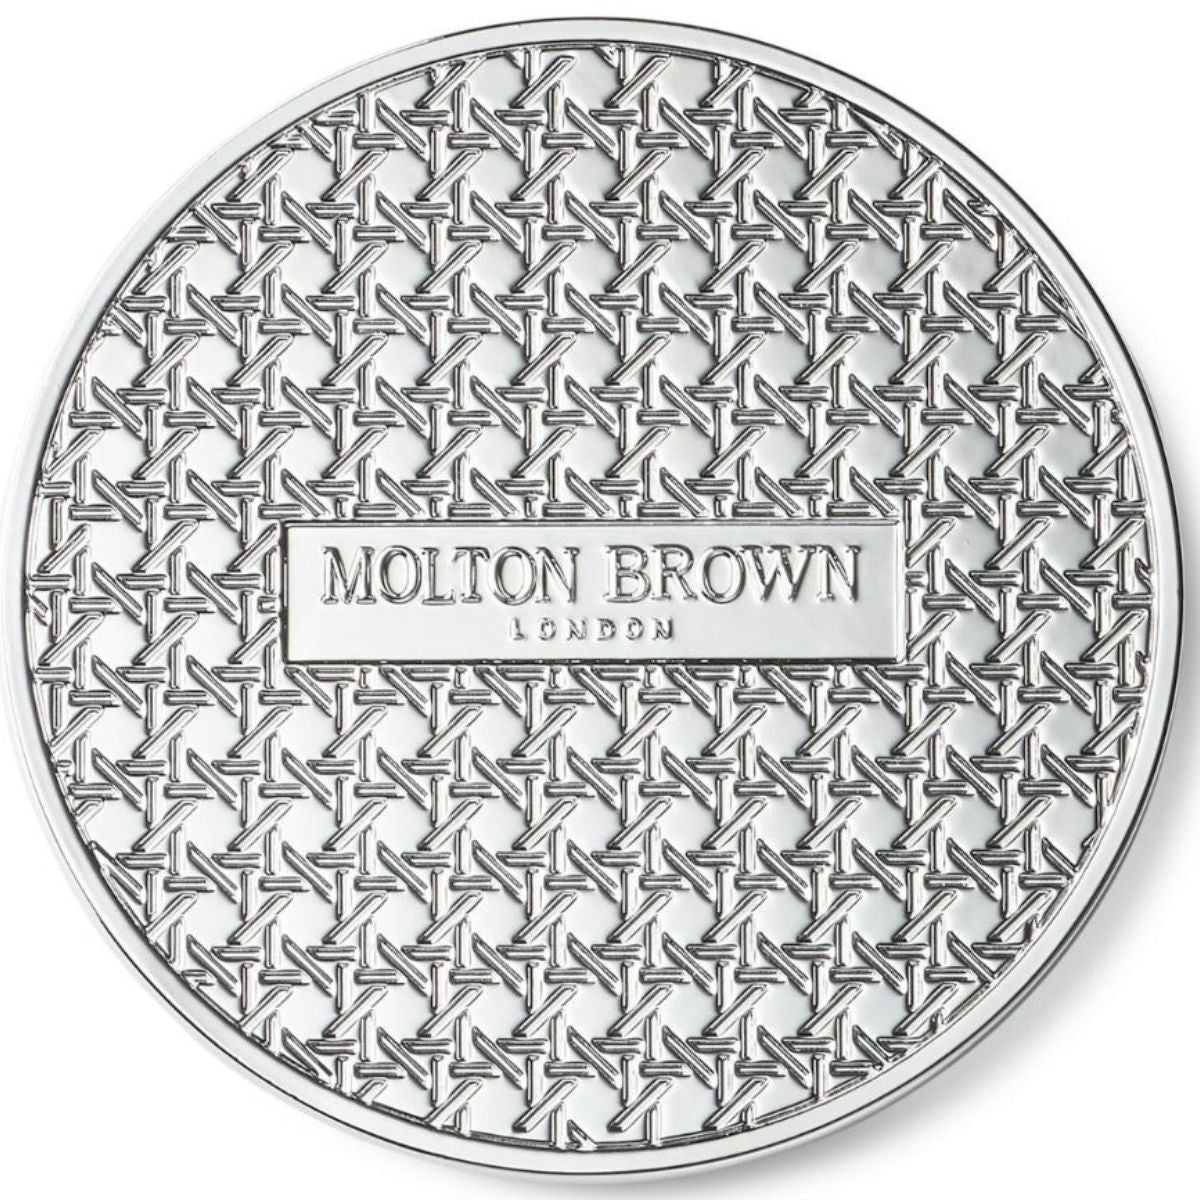 Molton Brown Signature Single Wick Candle Lid